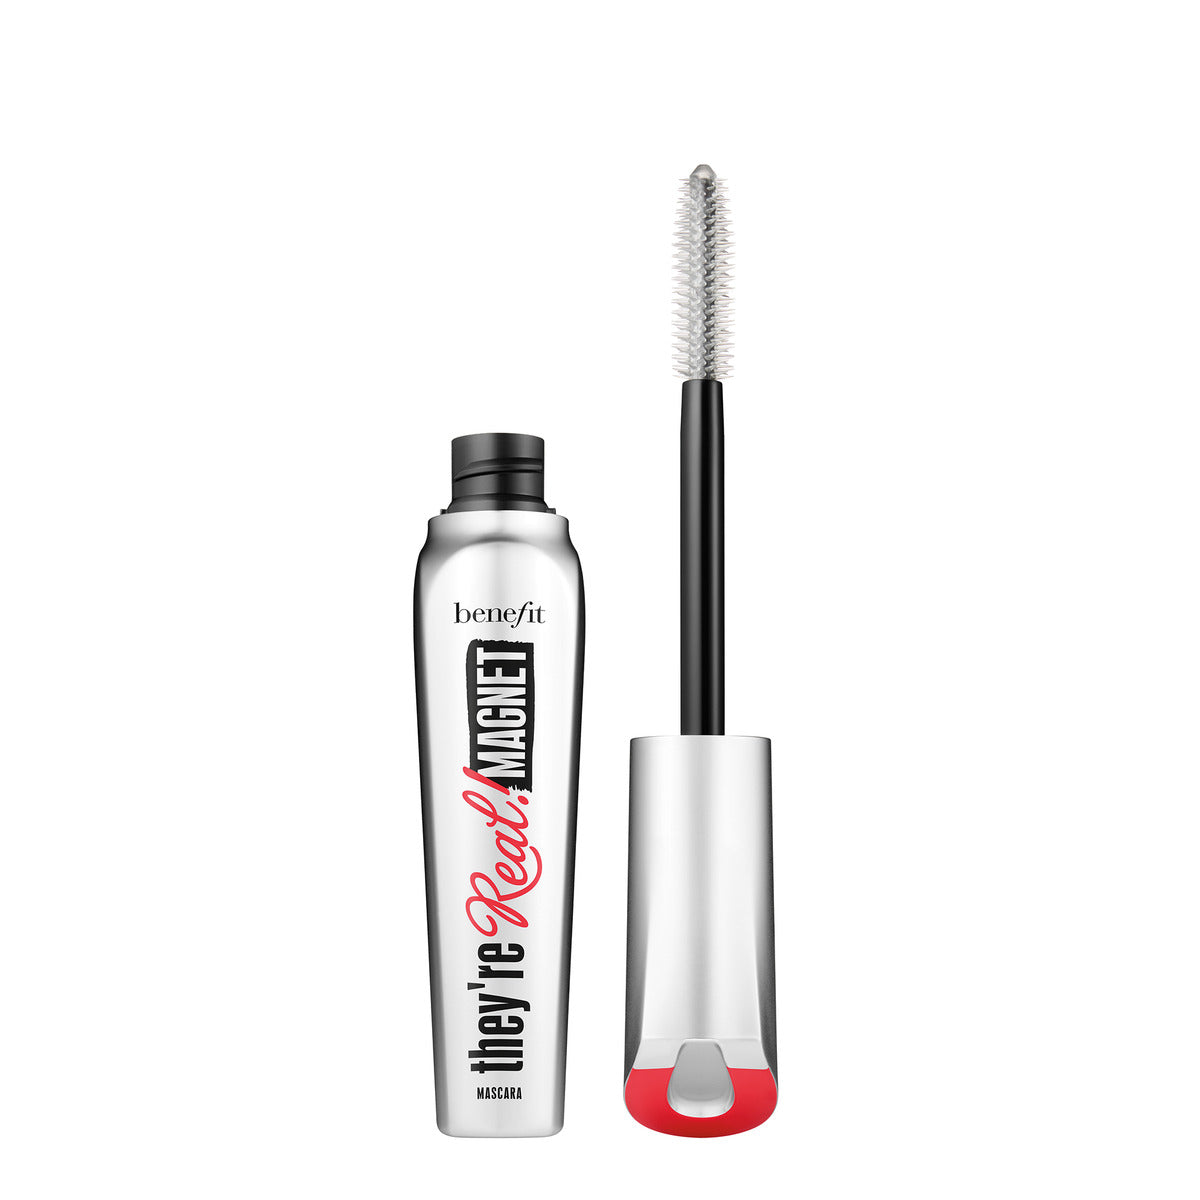 THEY'RE REAL! MAGNET MASCARA